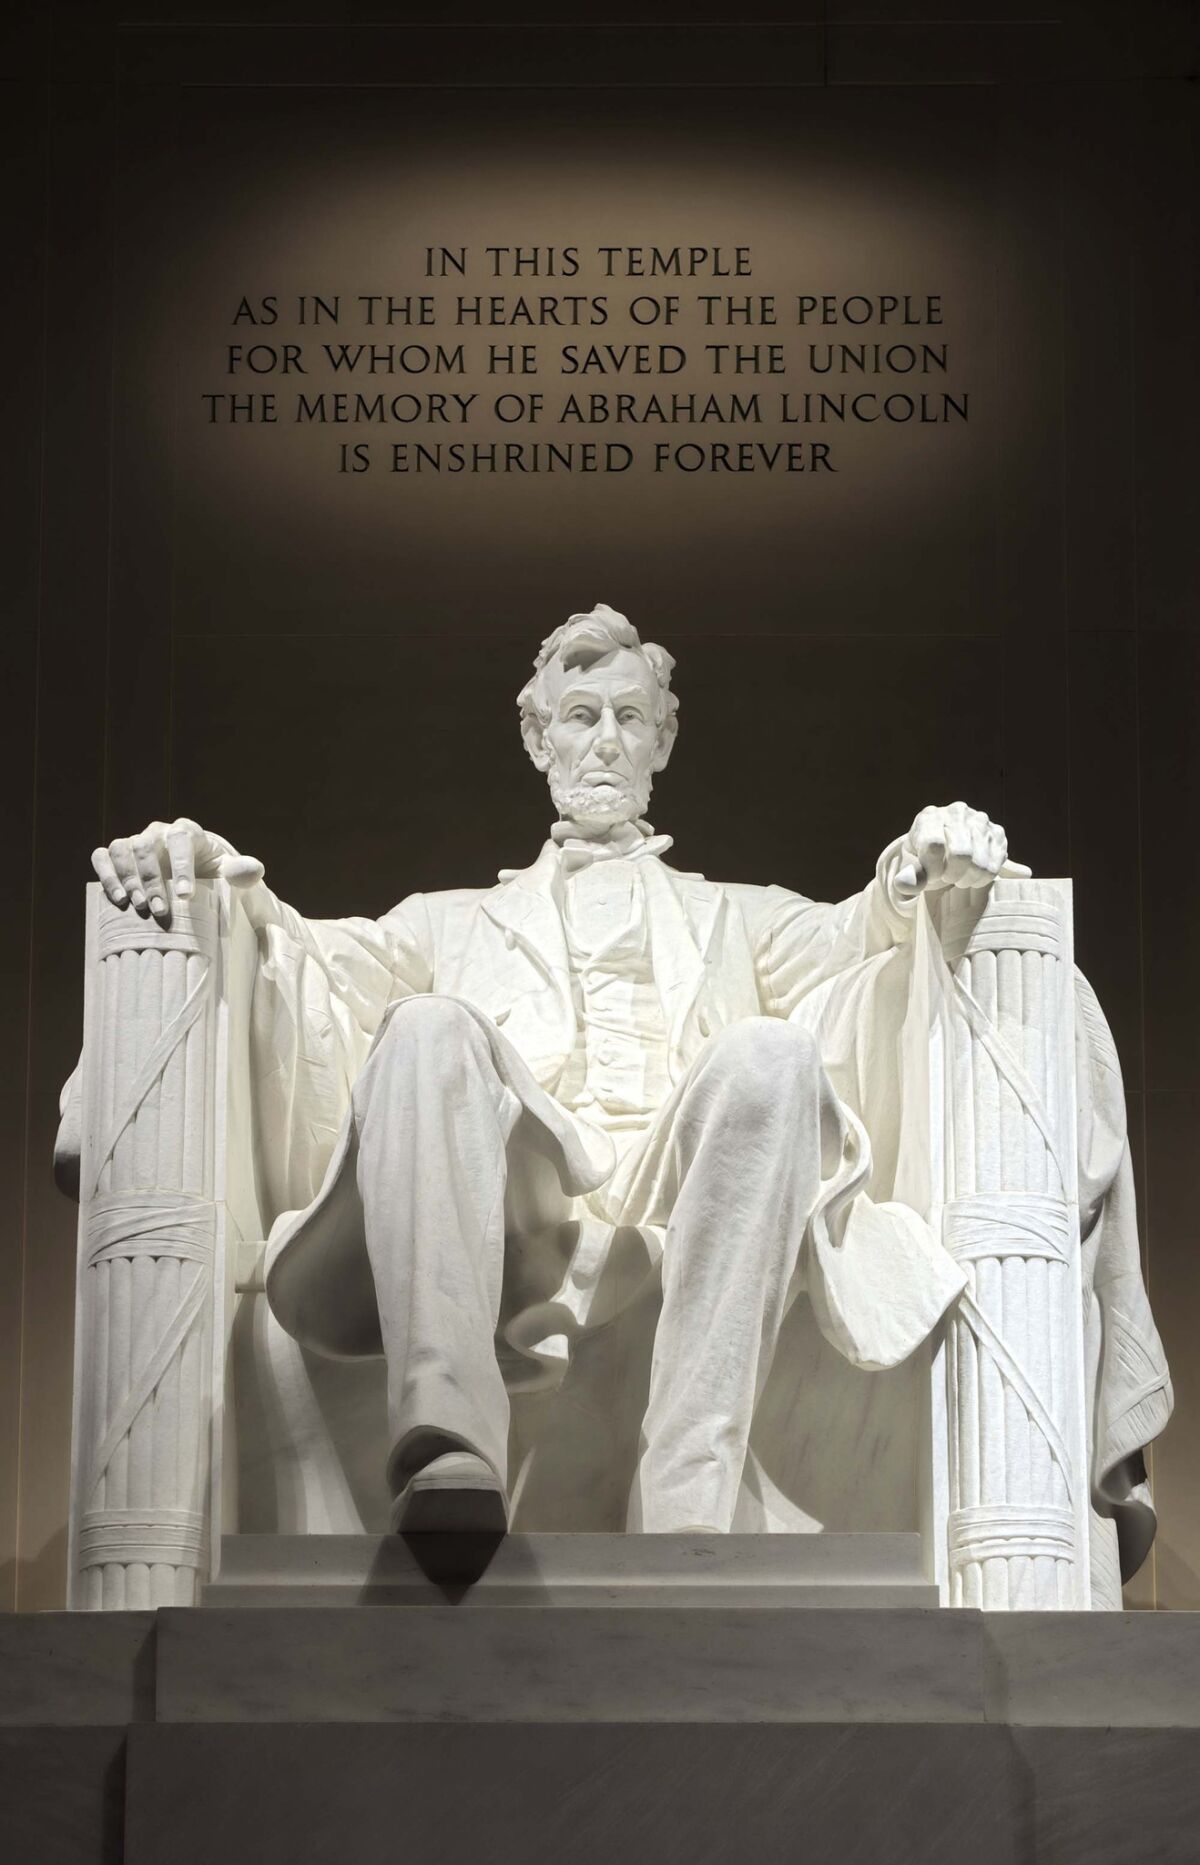 A photo of the Lincoln Memorial in Washington, D.C.